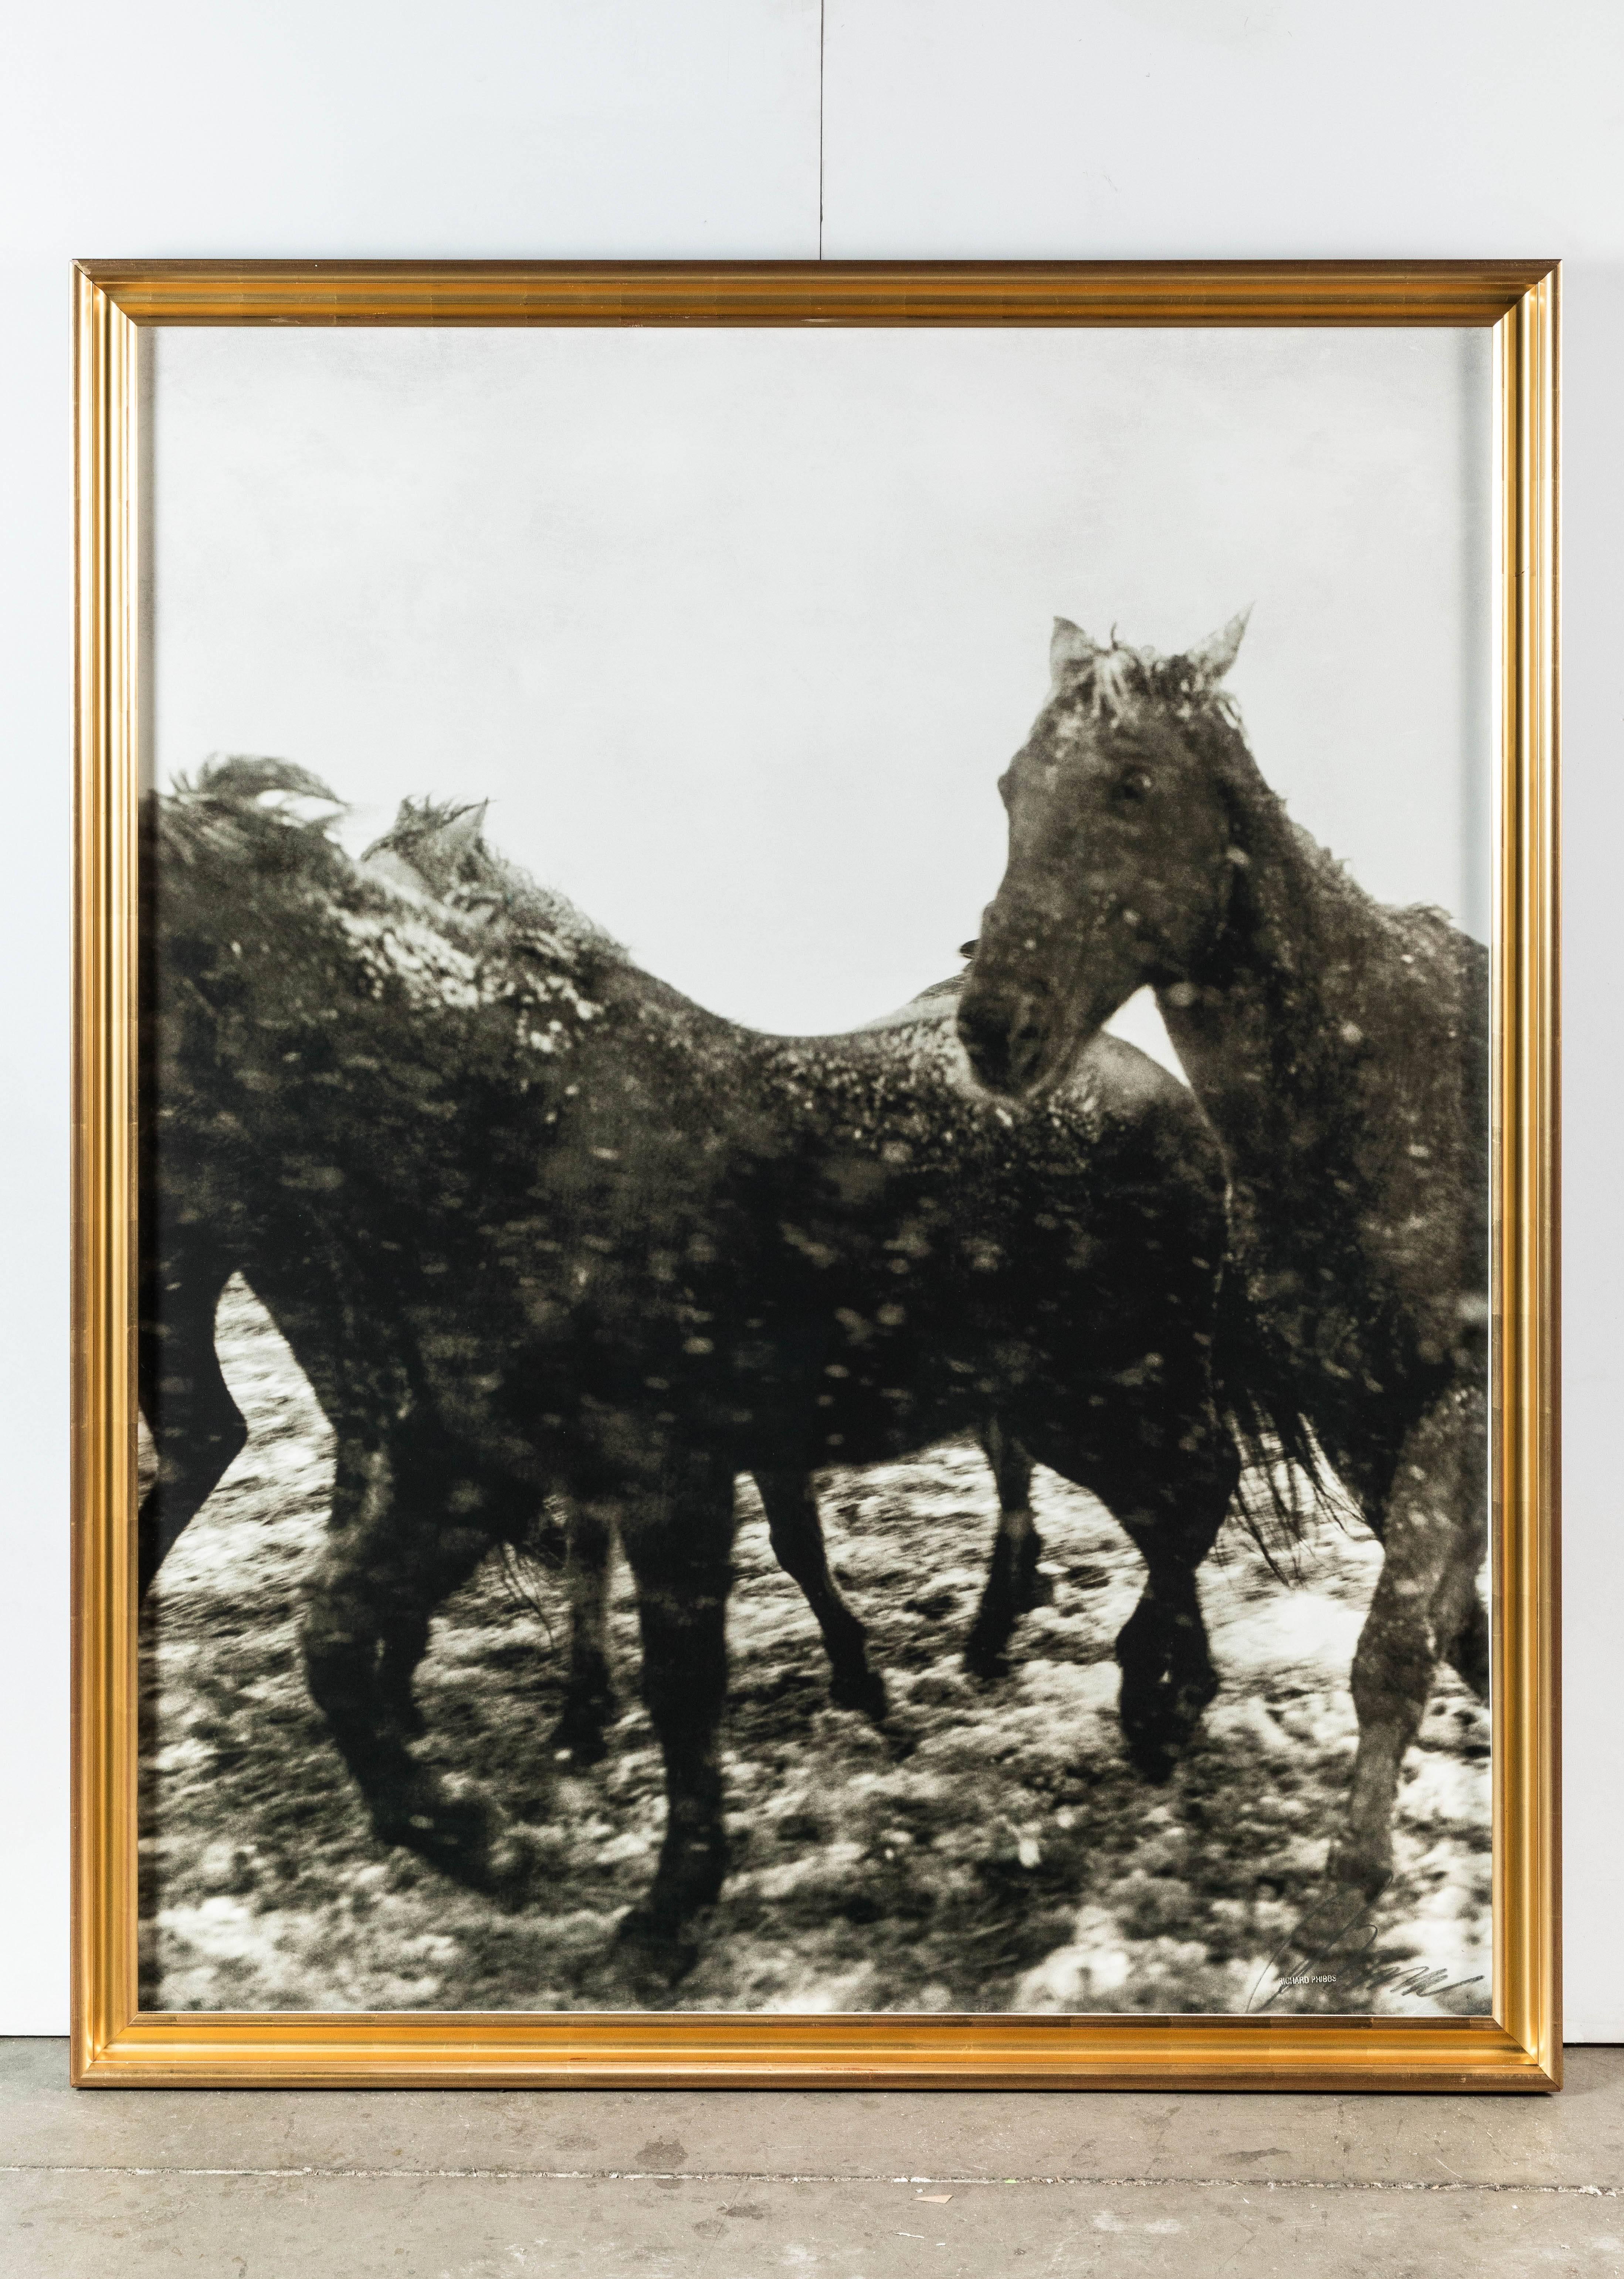 Triptych of horses in the snow, Montana, 1999 by Richard Phibbs
Archival fine art pigment print
Measure: 43.3 inches x 54 inches
Antique Distress B&W Vertical
Edition 2 of 25
Each print is signed and embossed.
 